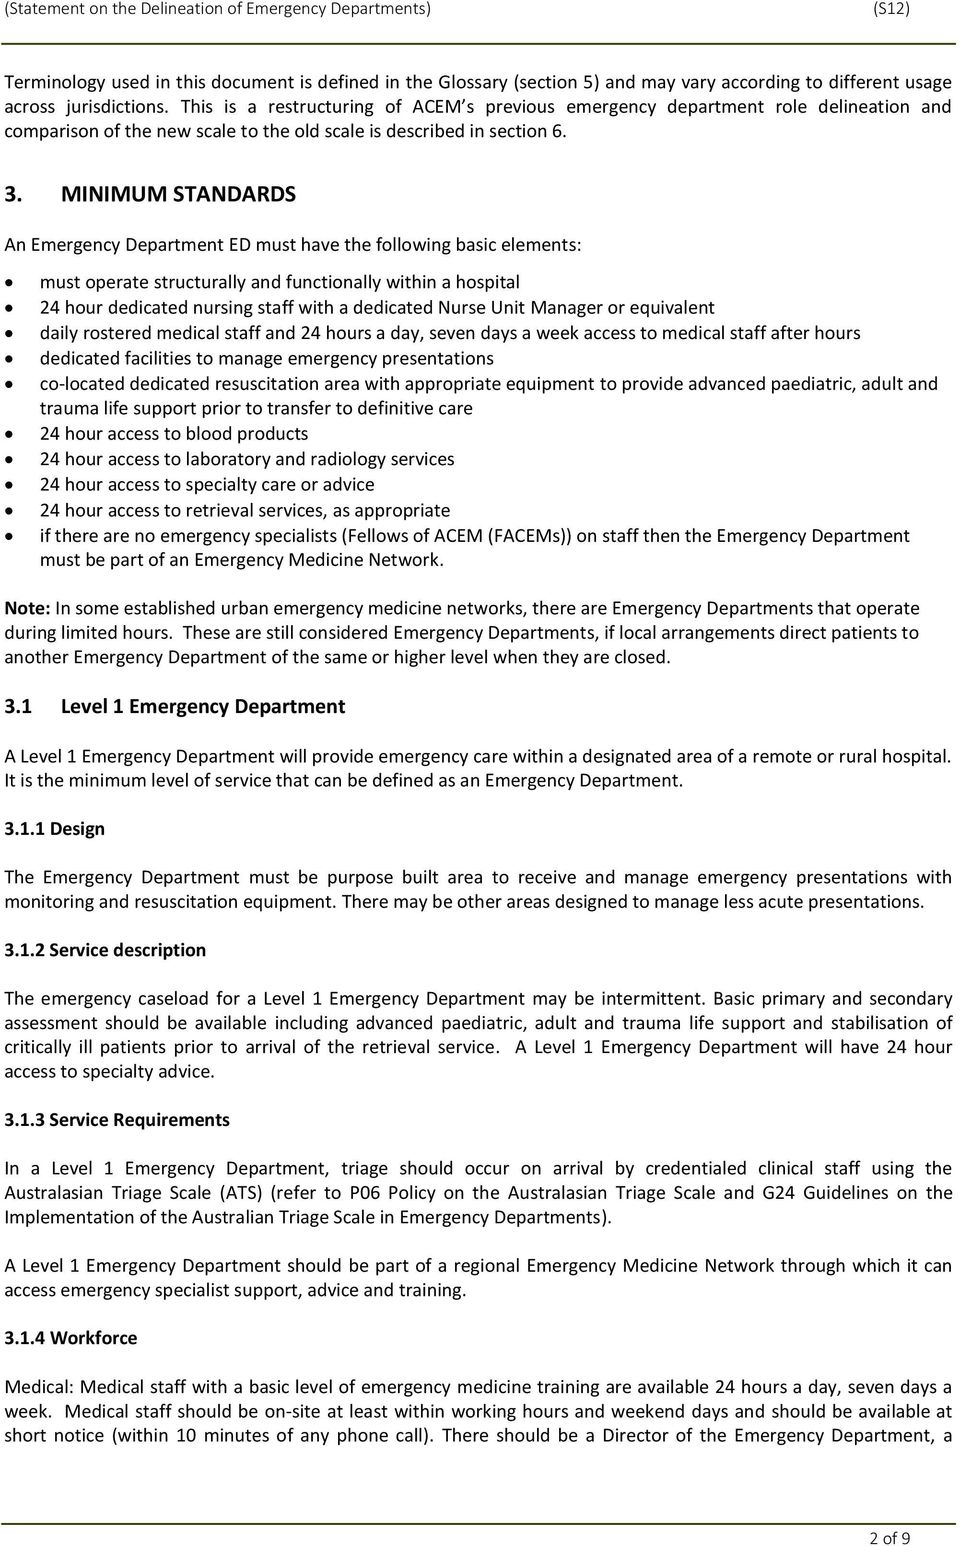 MINIMUM STANDARDS An Emergency Department ED must have the following basic elements: must operate structurally and functionally within a hospital 24 hour dedicated nursing staff with a dedicated